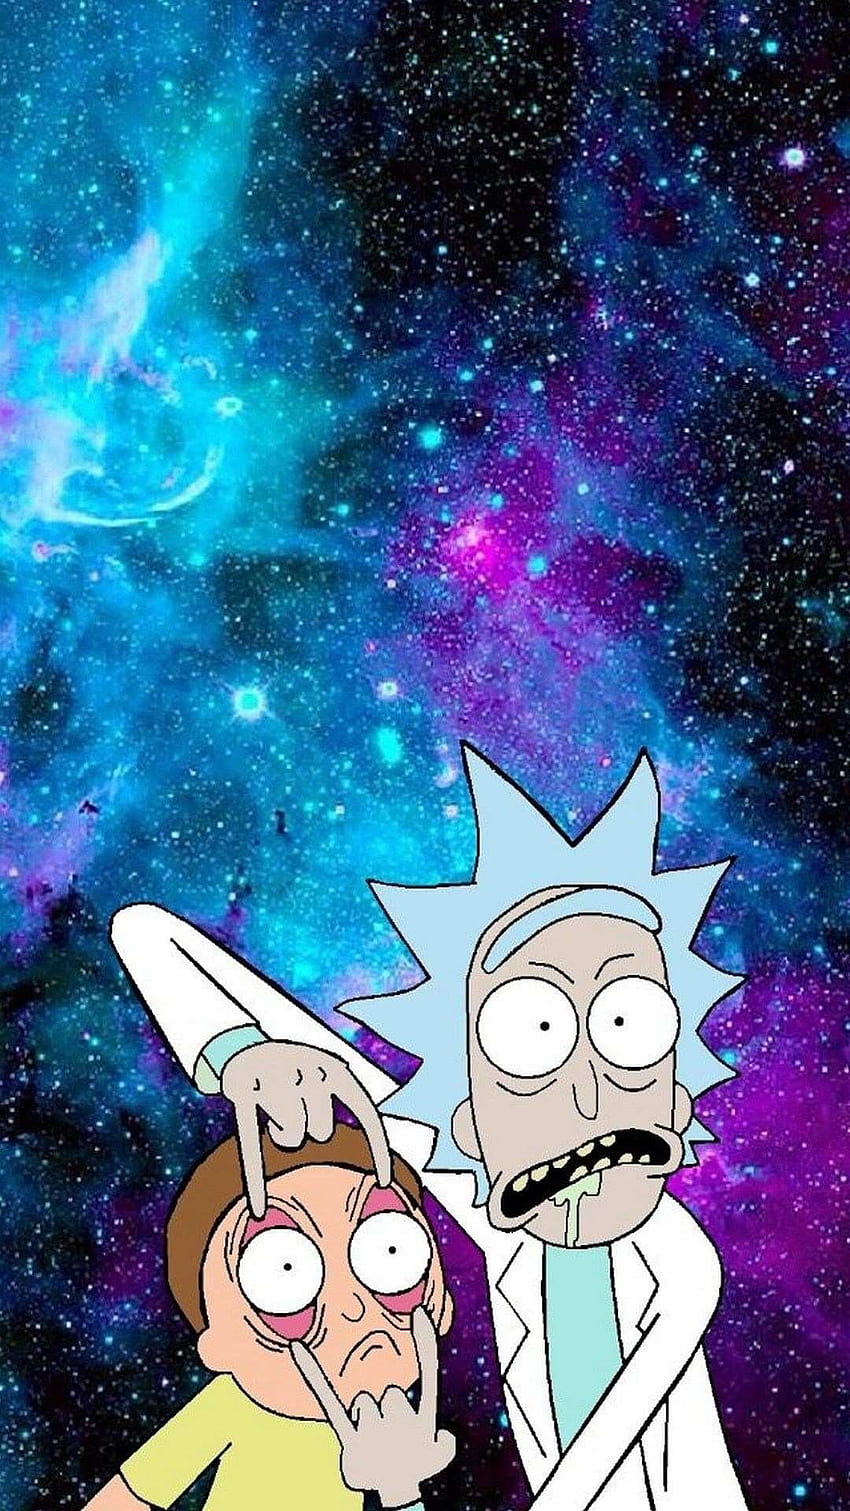 Best Rick and Morty Wallpapers for Wallpaper Engine 2022 